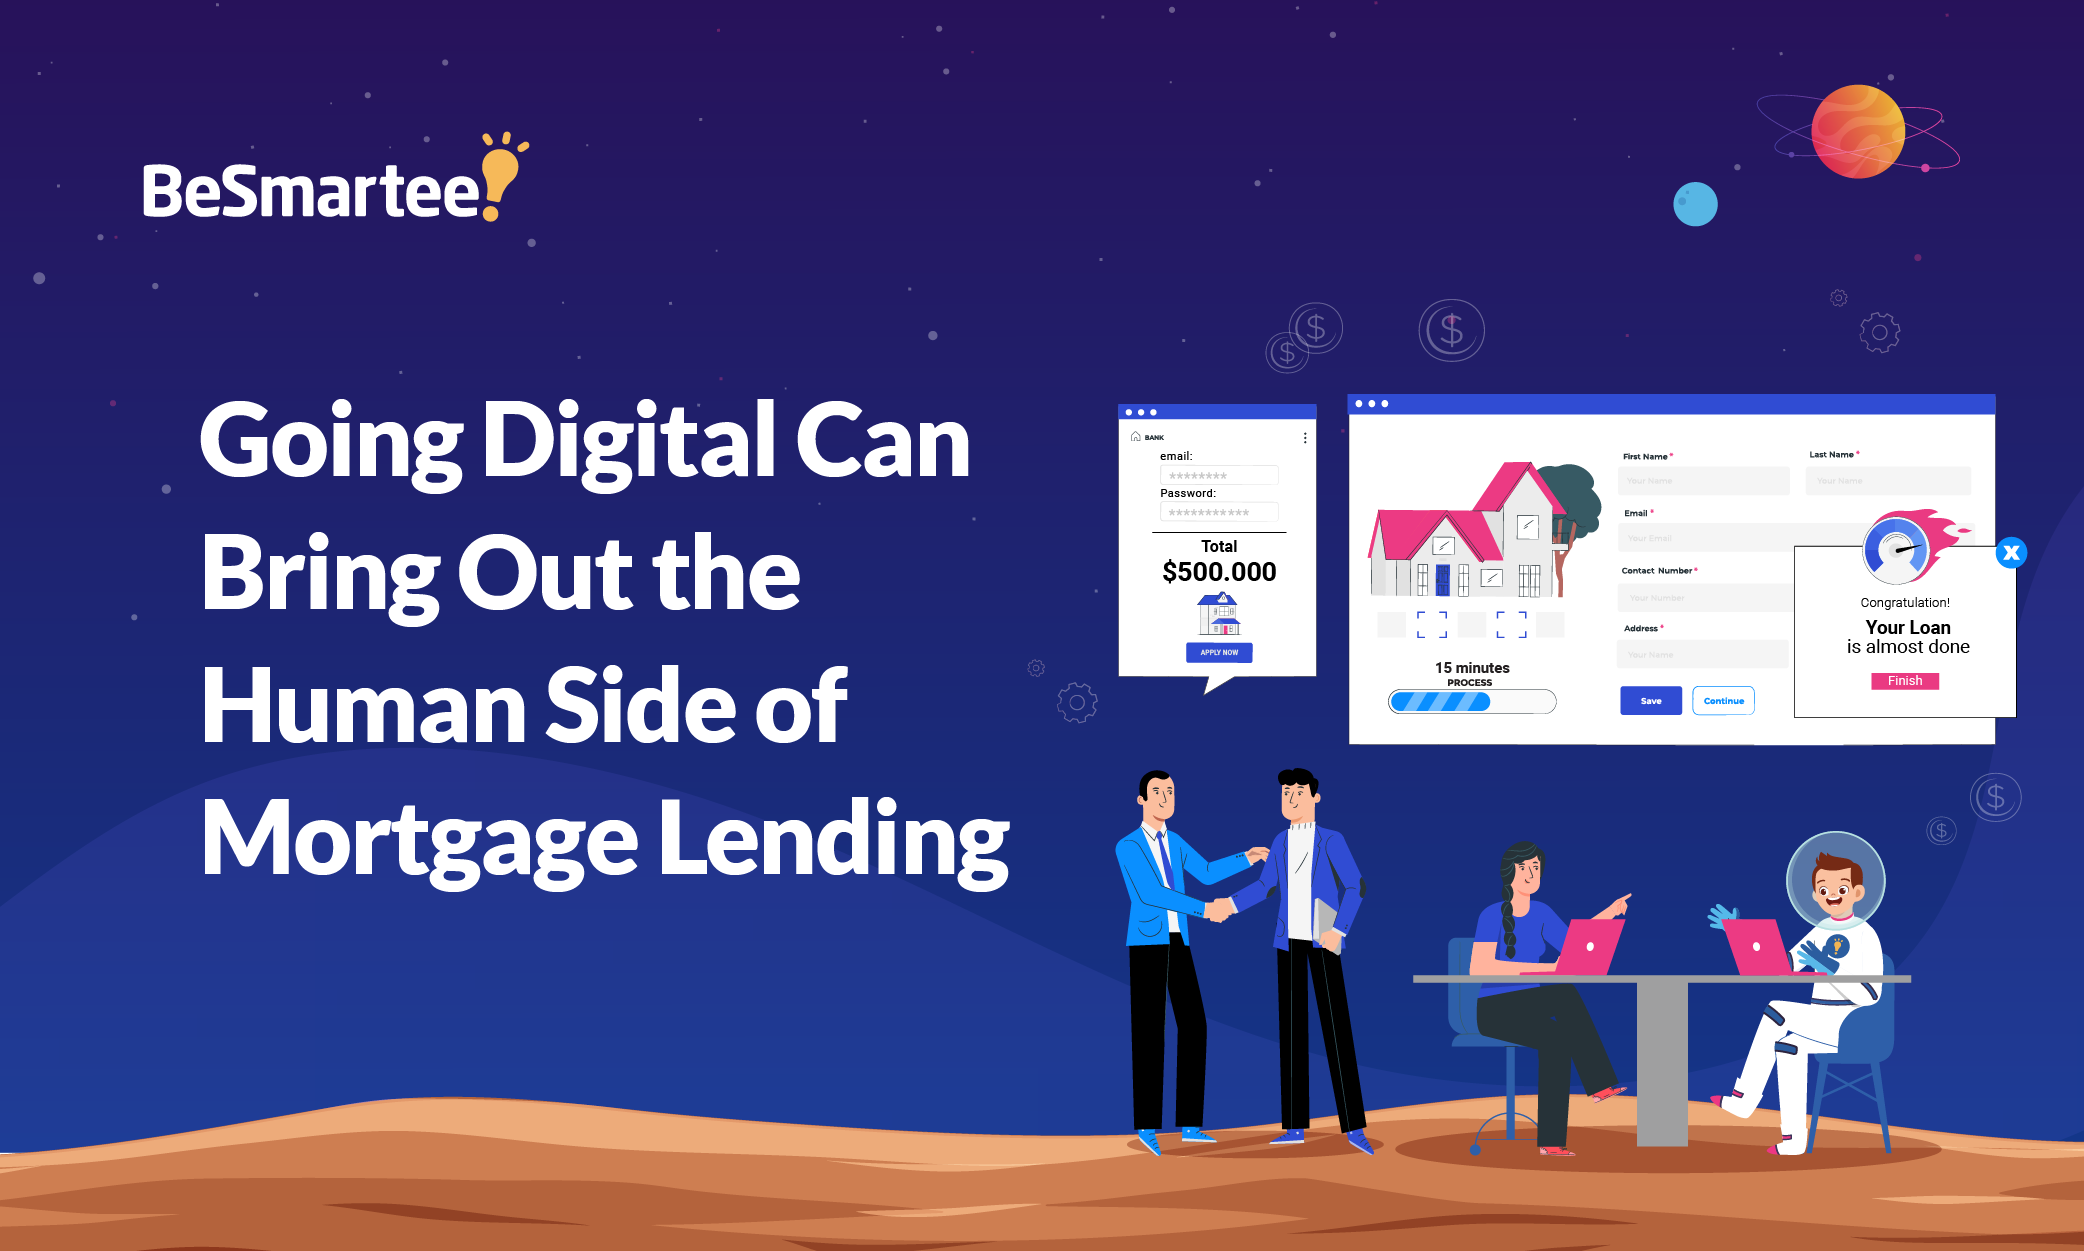 Going Digital Can Bring Out the Human Side of Mortgage Lending